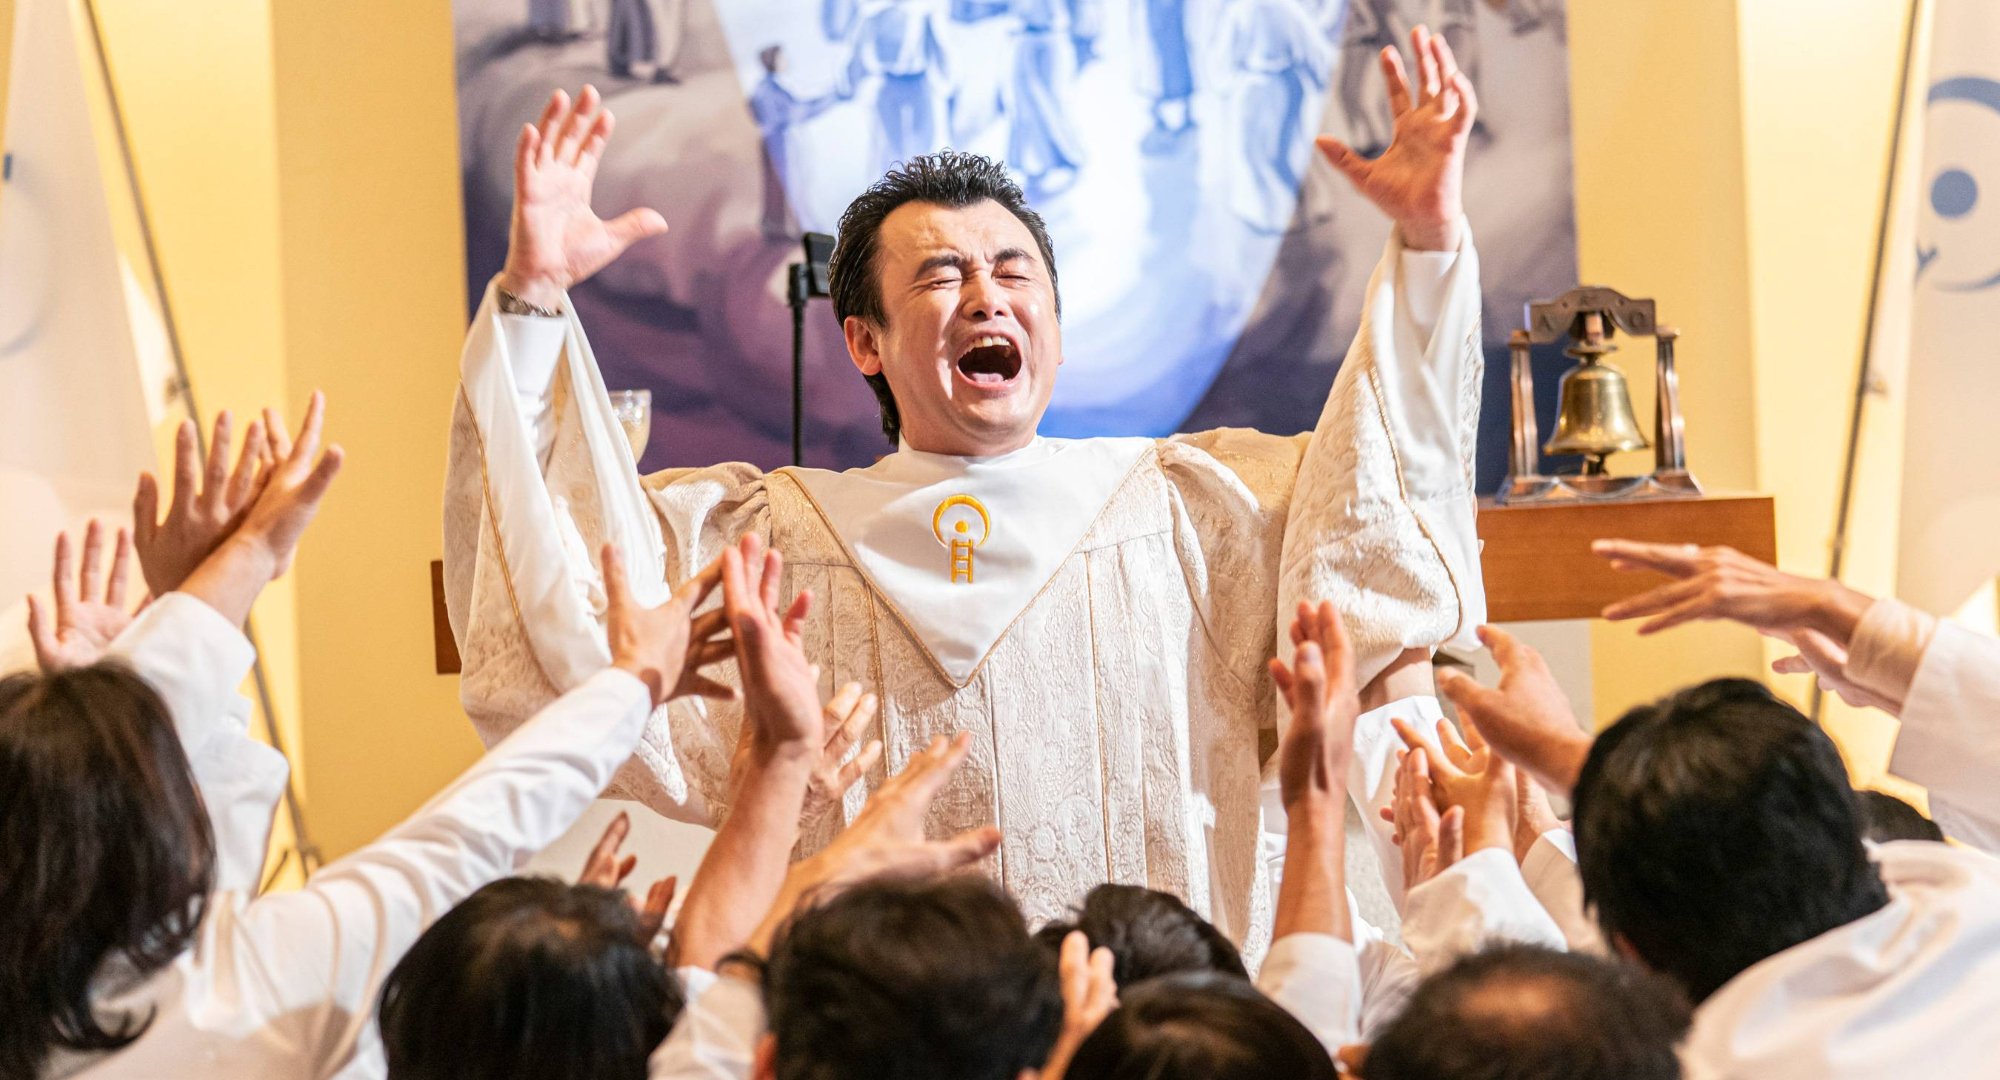 Sunbaek Church leader in 'Taxi Driver 2' Episodes 7 and 8.